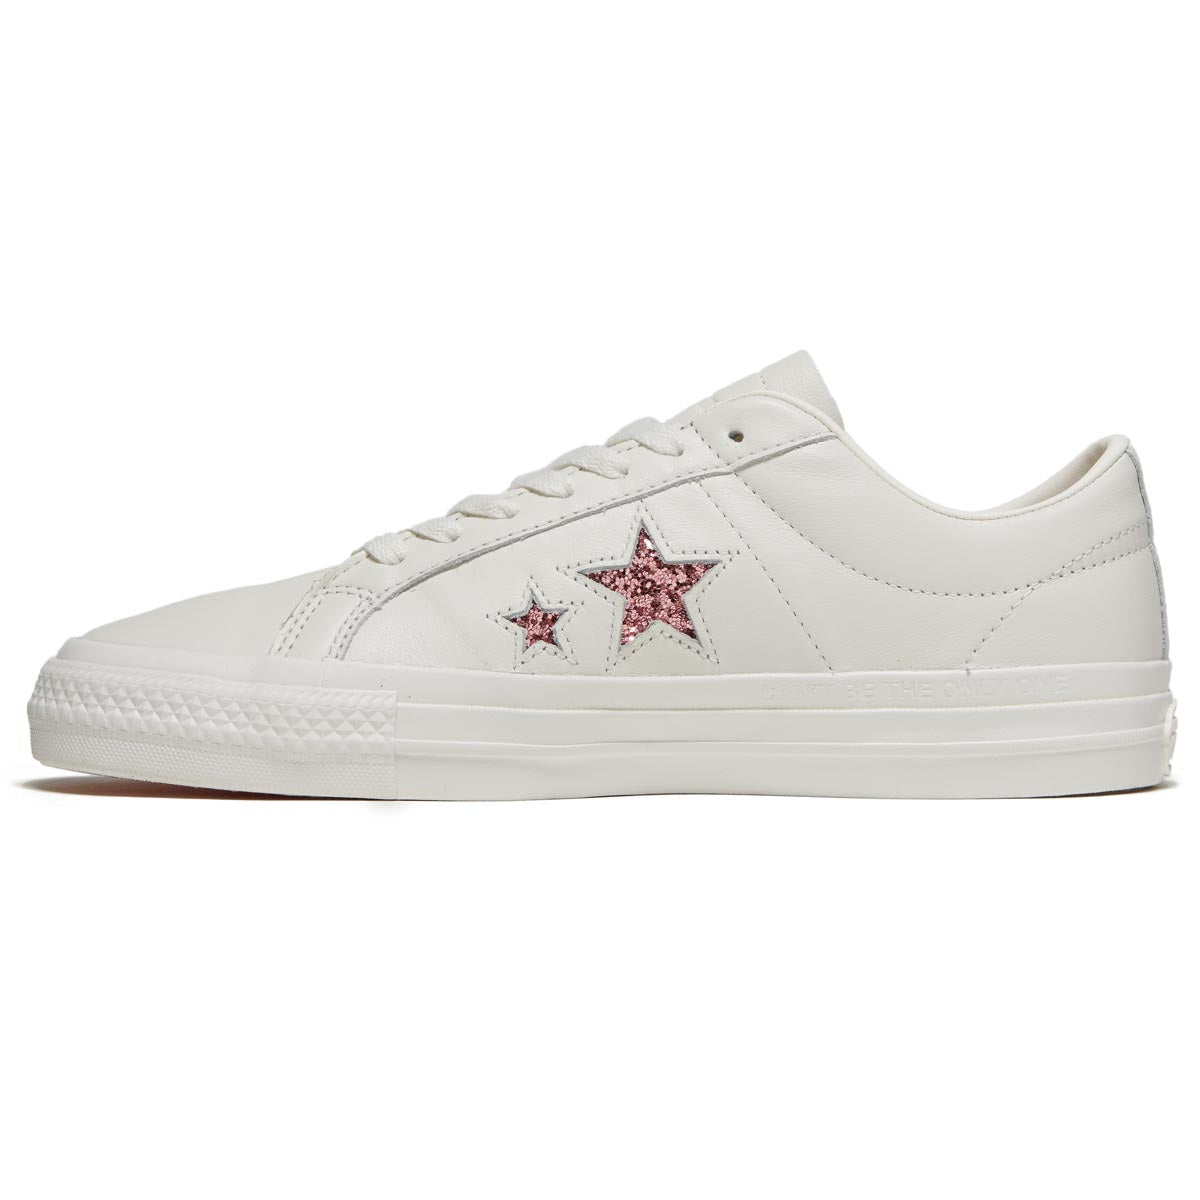 Converse x Turnstile One Star Pro Ox Shoes - White/Pink/White image 2